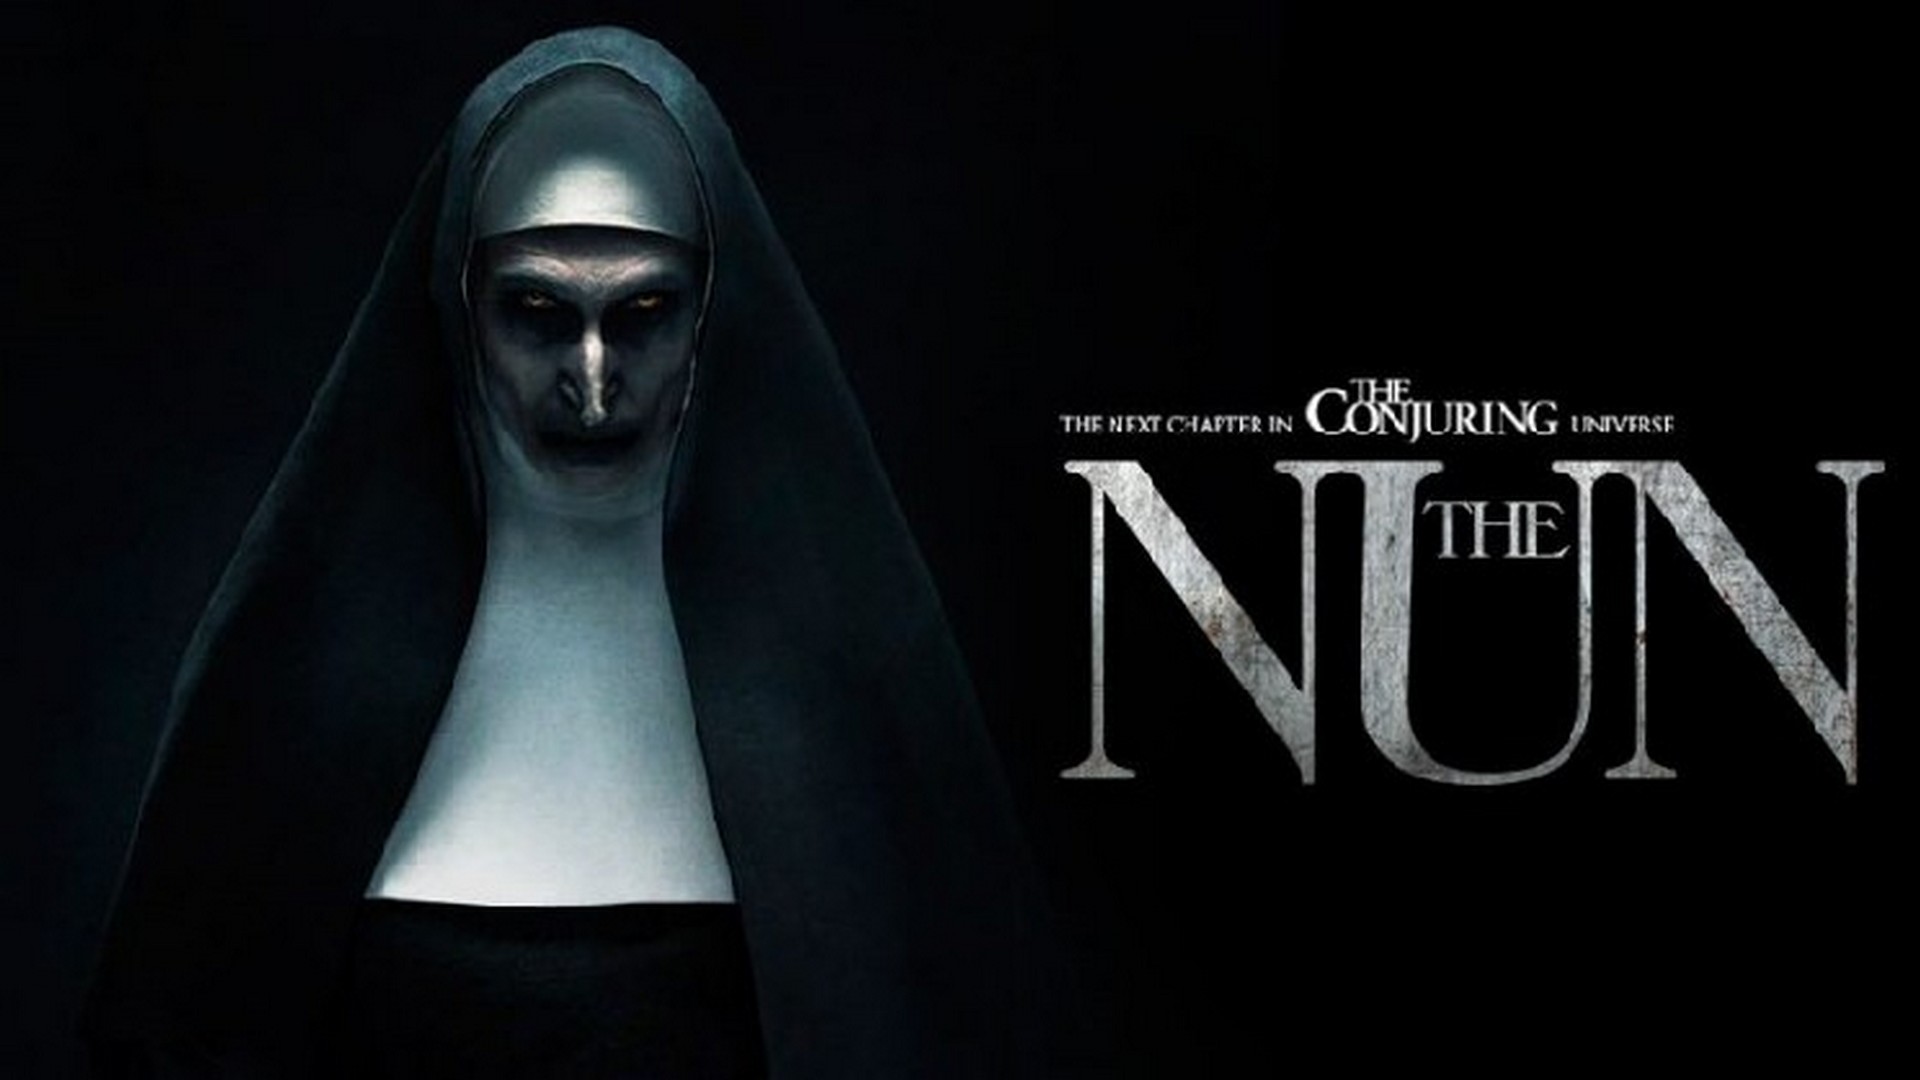 The Nun Desktop Wallpaper with image resolution 1920x1080 pixel. You can use this wallpaper as background for your desktop Computer Screensavers, Android or iPhone smartphones